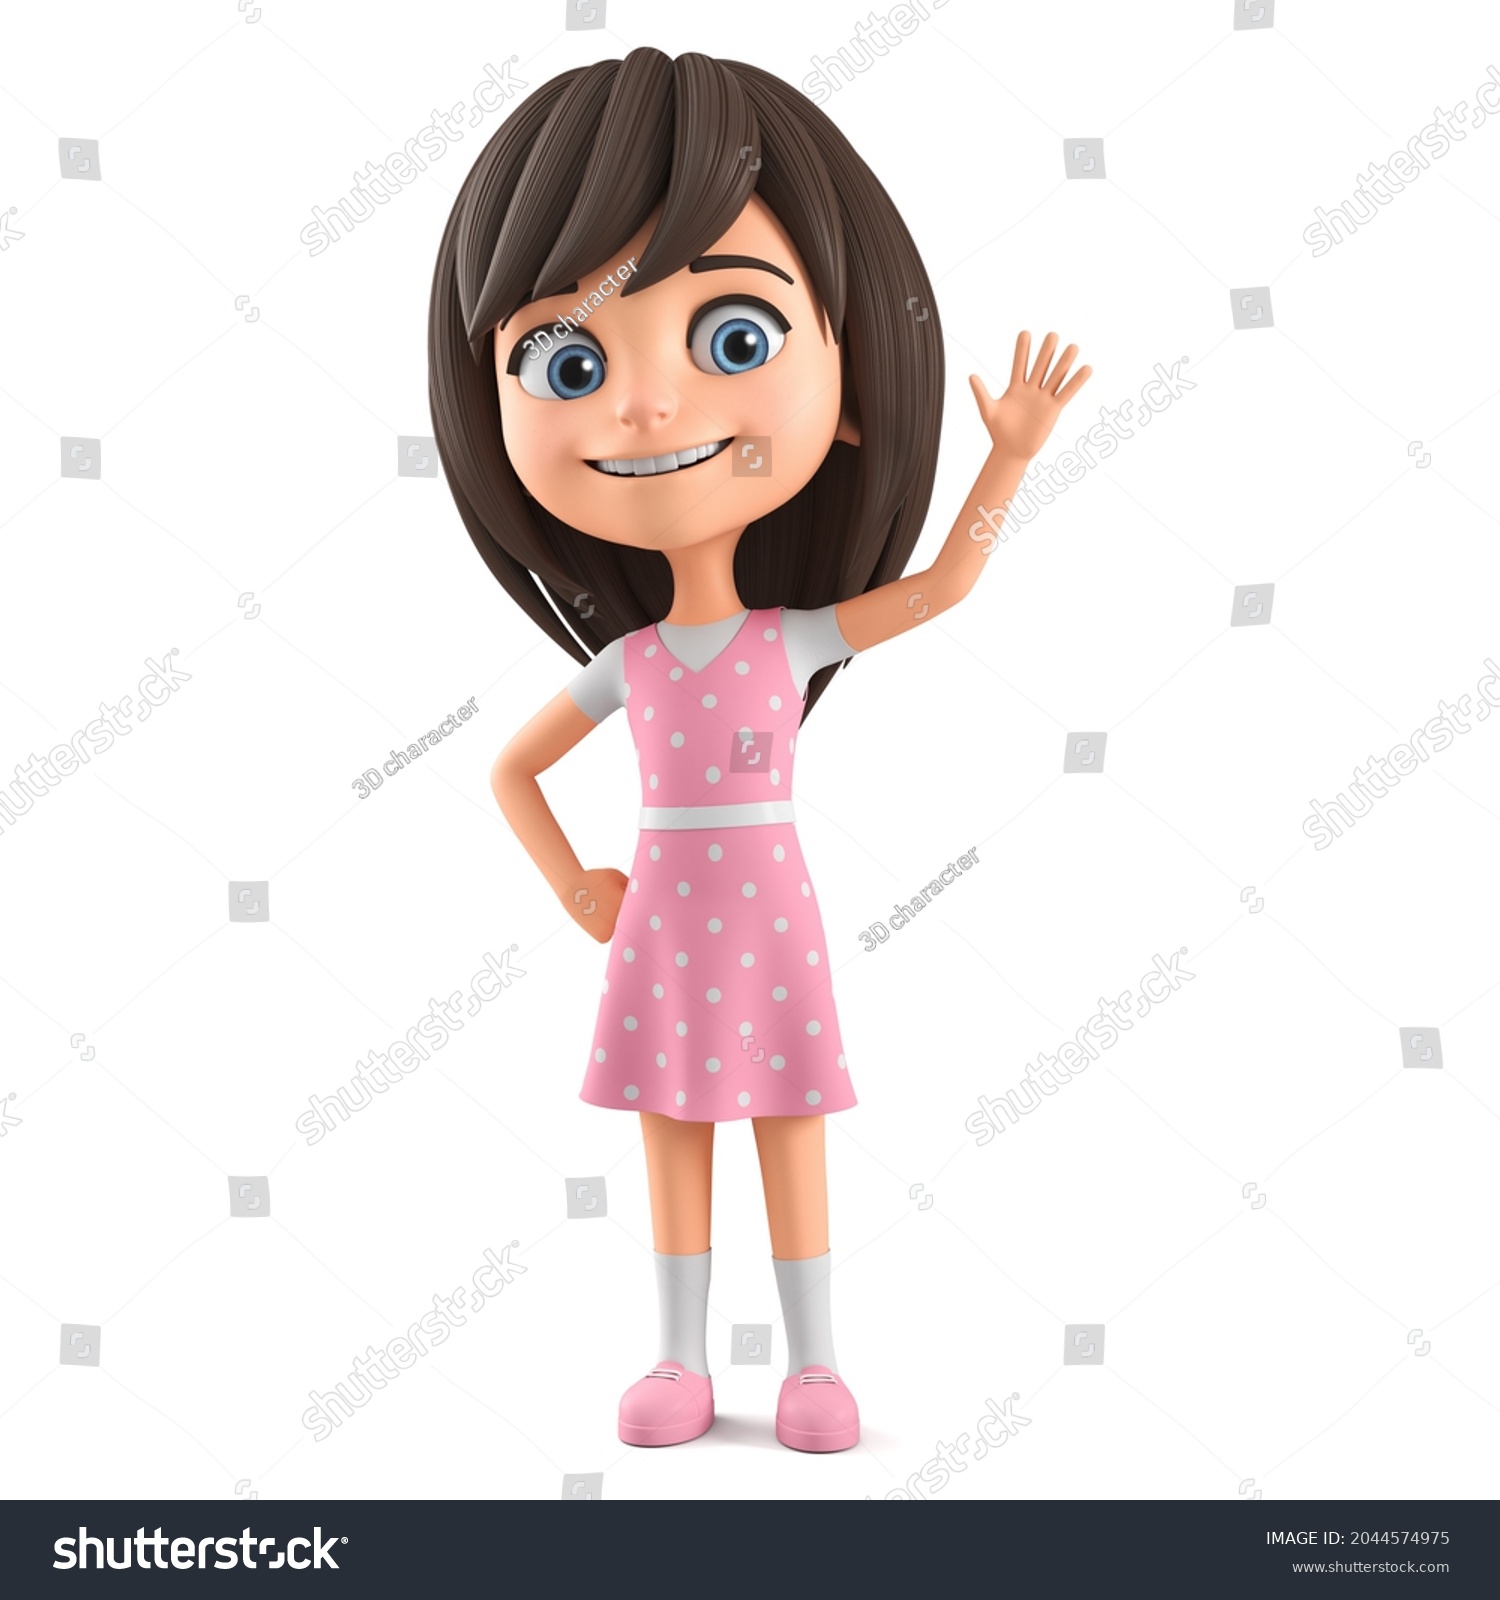 Stock Photo Cartoon Character Beautiful Little Girl In A Pink Dress And Blue Eyes Welcomes On A White 2044574975 